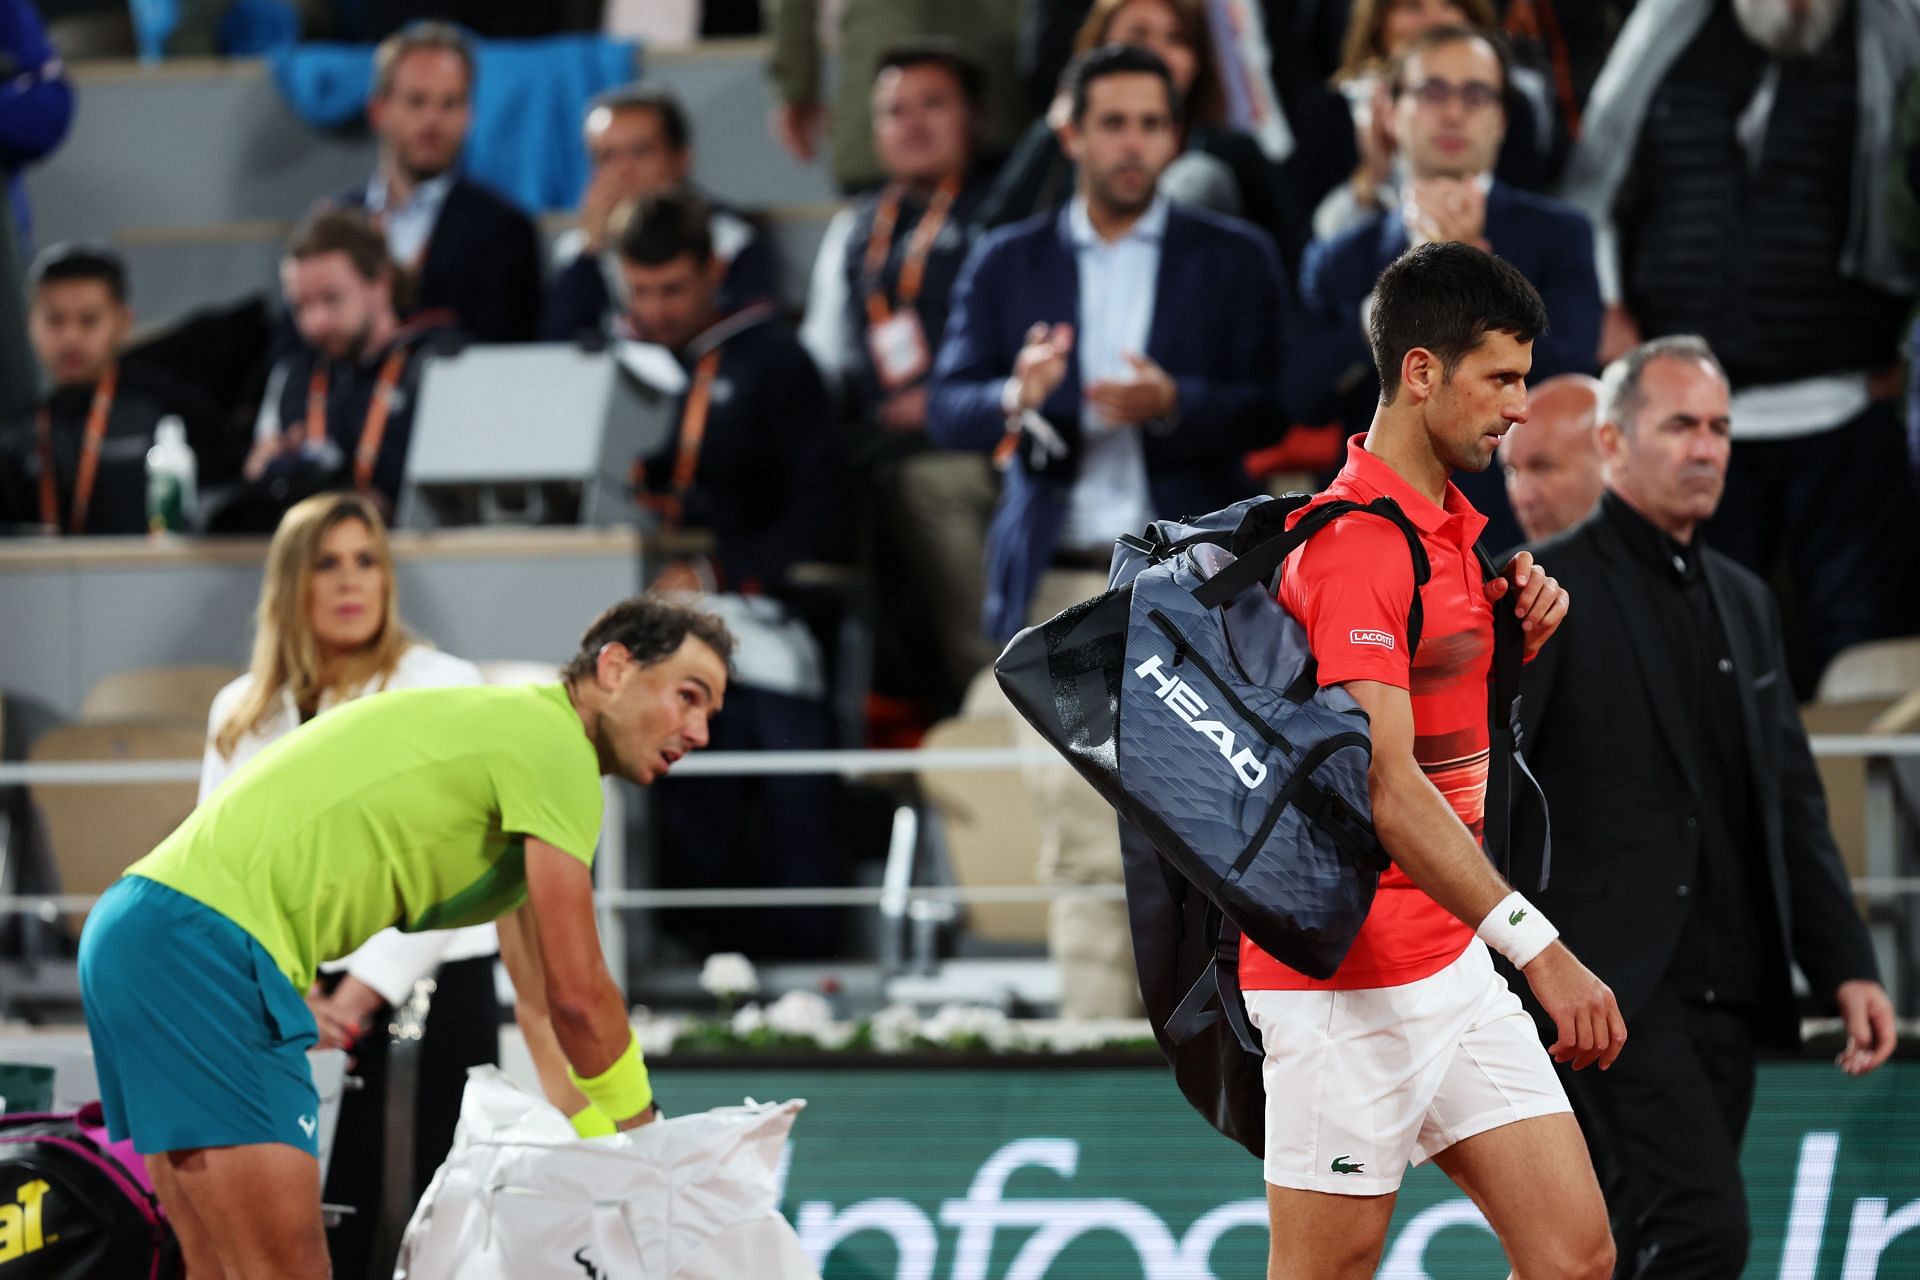 Rafael Nadal and Novak Djokovic previously locked horns at the 2022 French Open